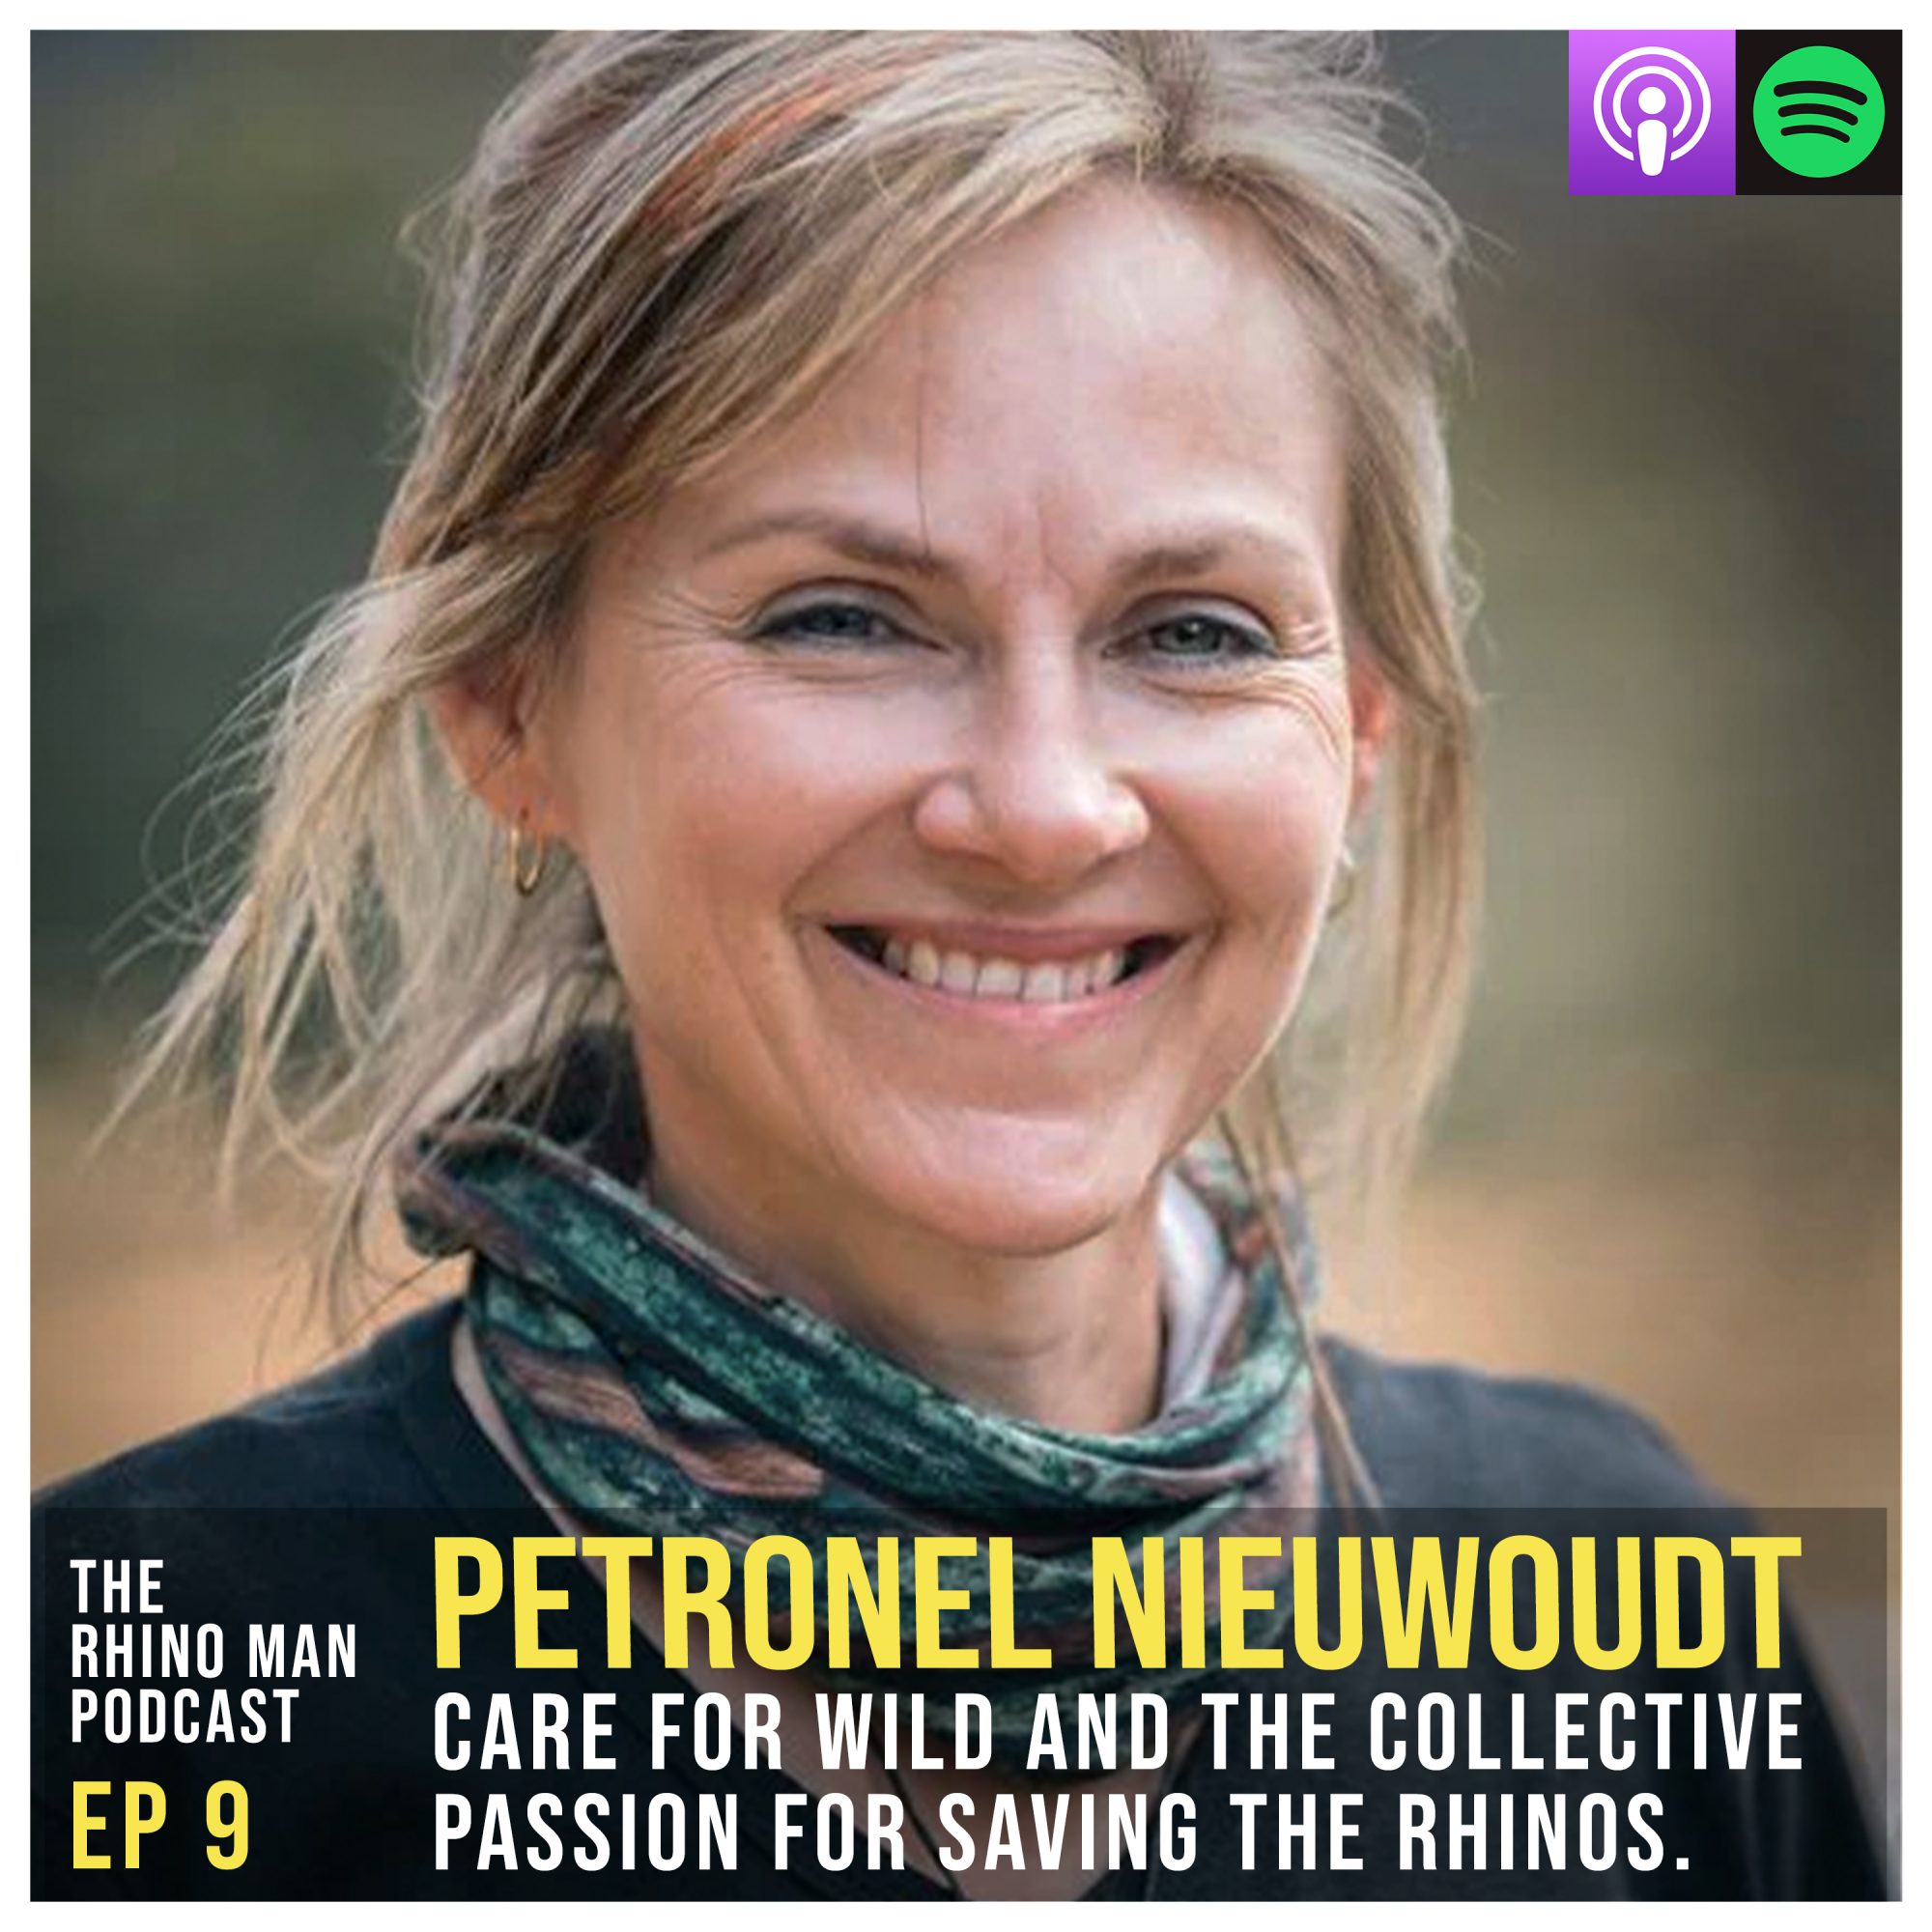 Ep 9: Petronel Nieuwoudt – Care for Wild and the collective passion for saving the rhinos.